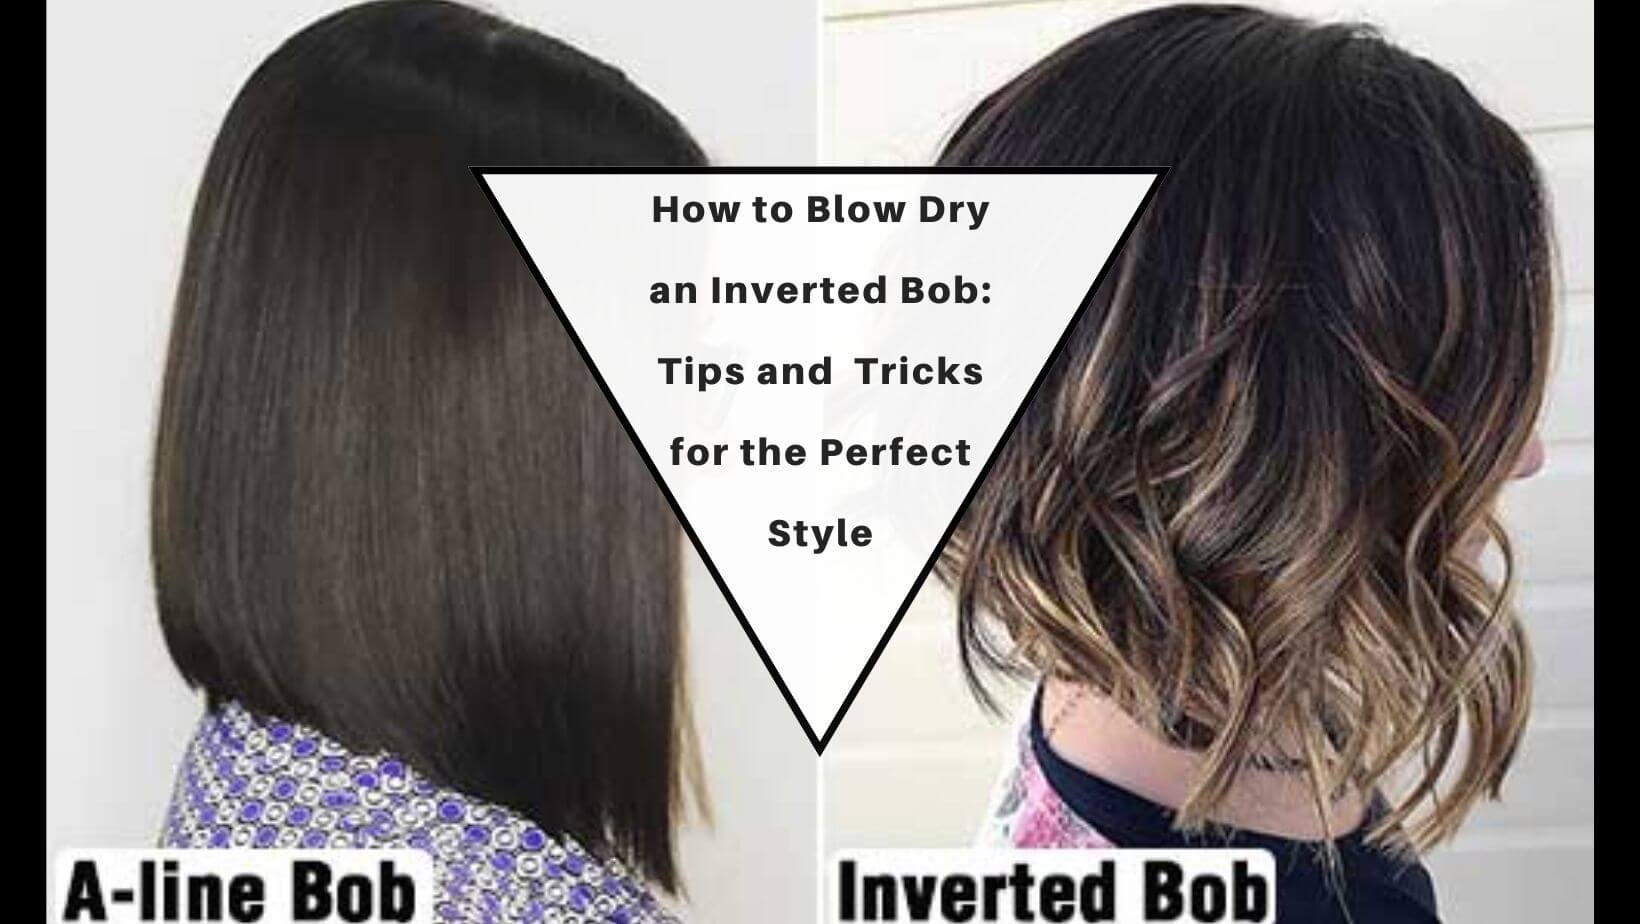 How to Blow Dry an Inverted Bob